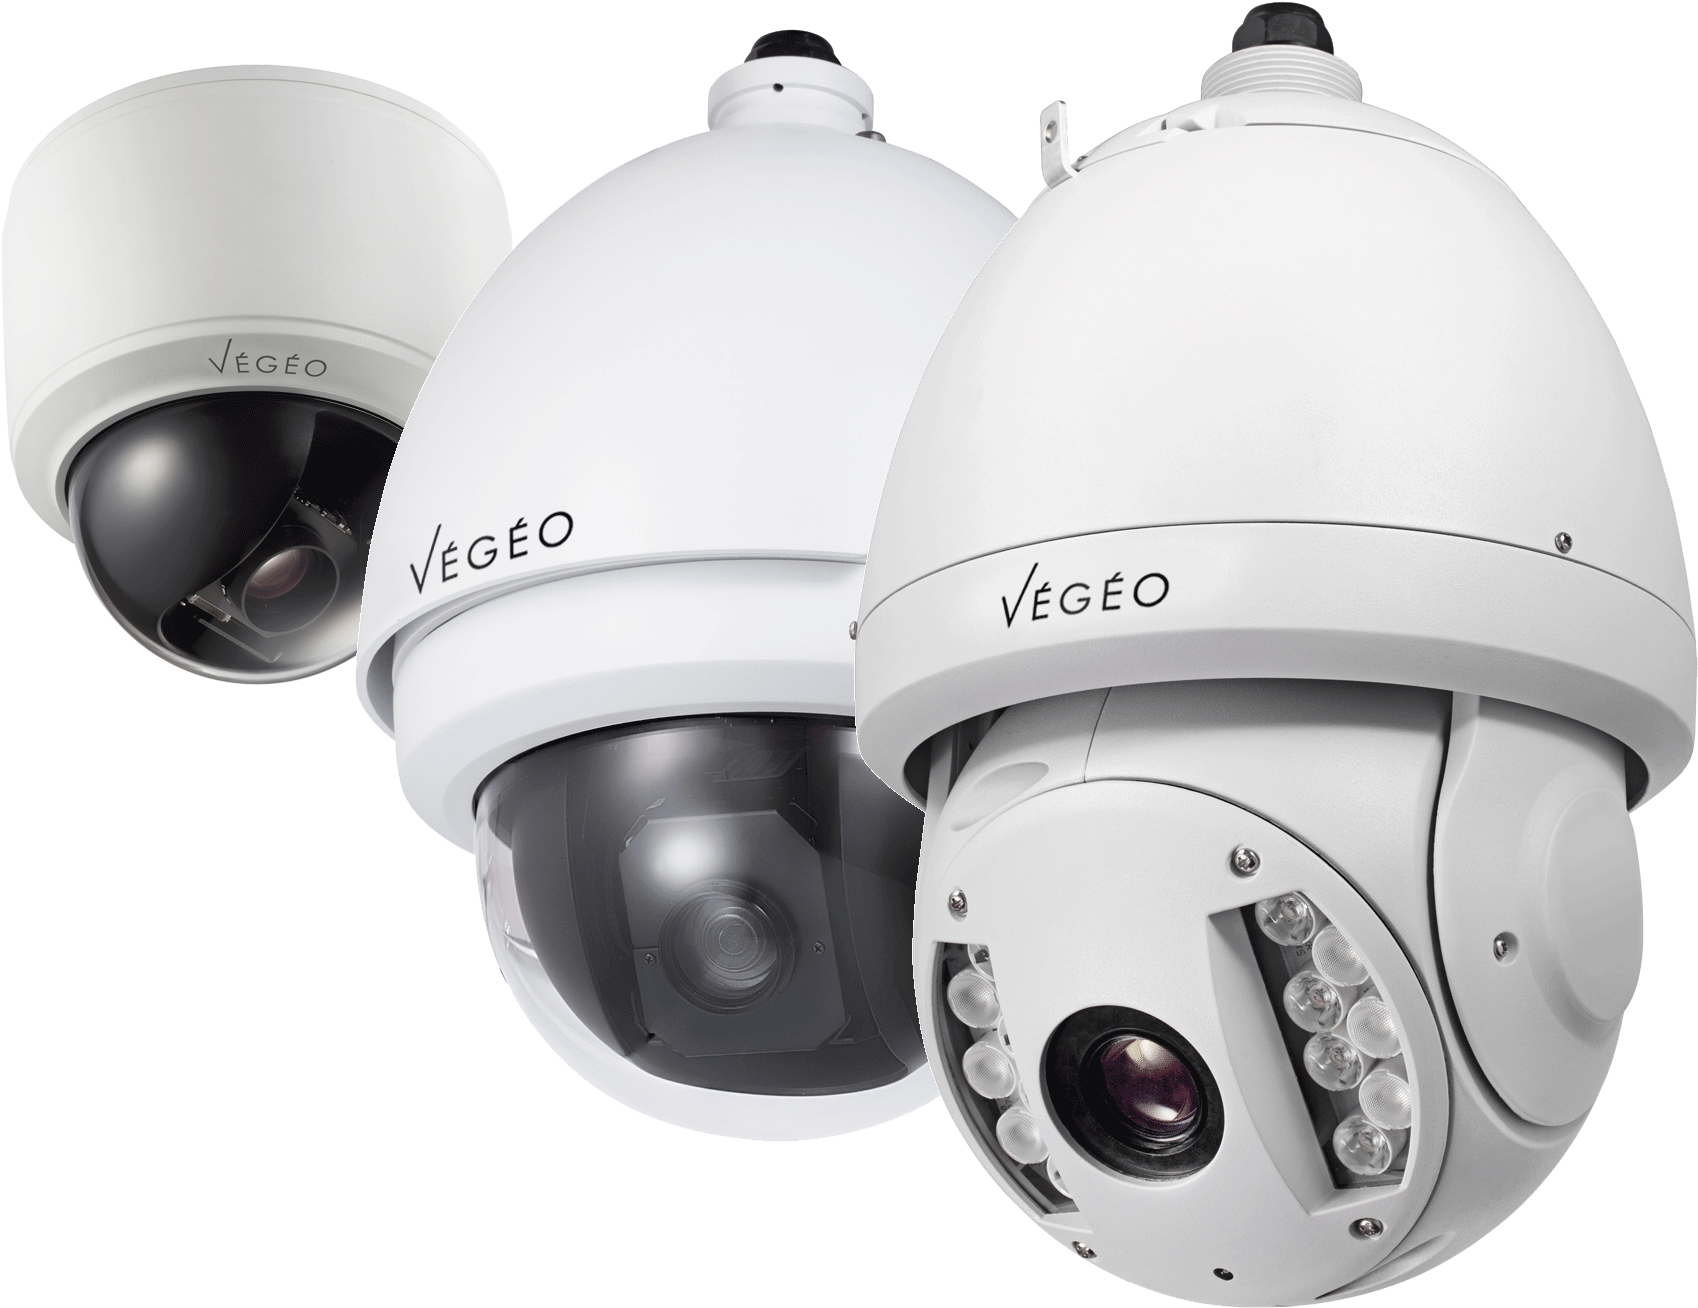 Download Motorized Controllable Surveillance Cameras 2 Megapixel Ptz Camera Png Image With No Background Pngkey Com